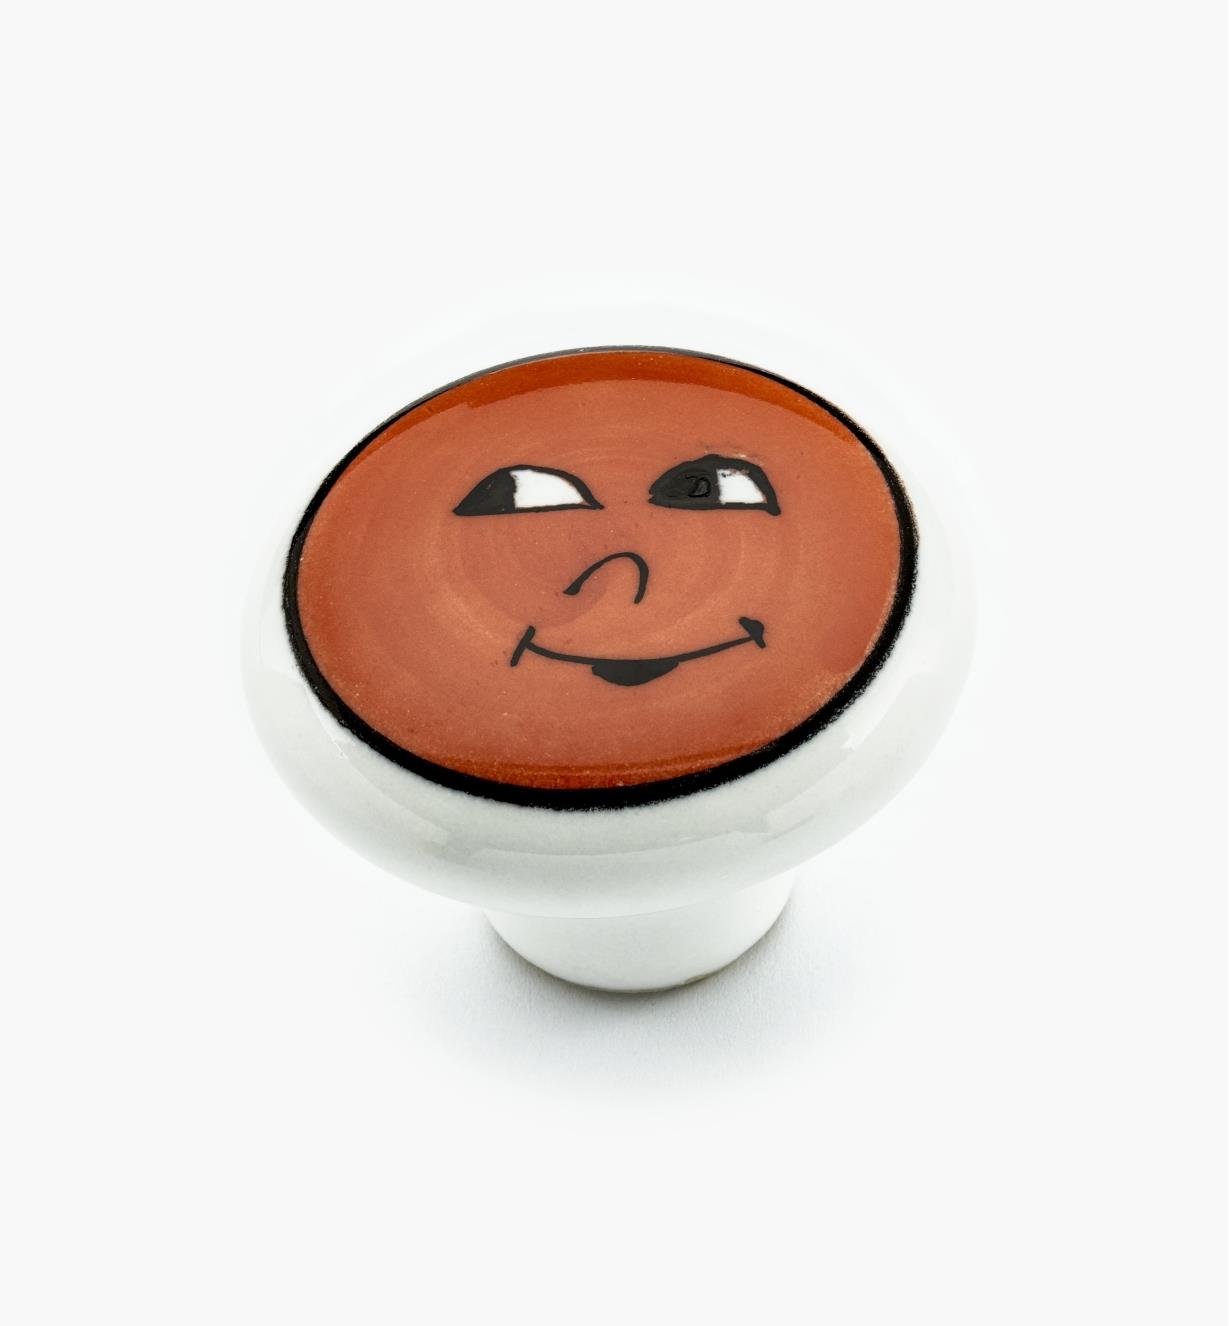 00W5301 - Red Face Knob